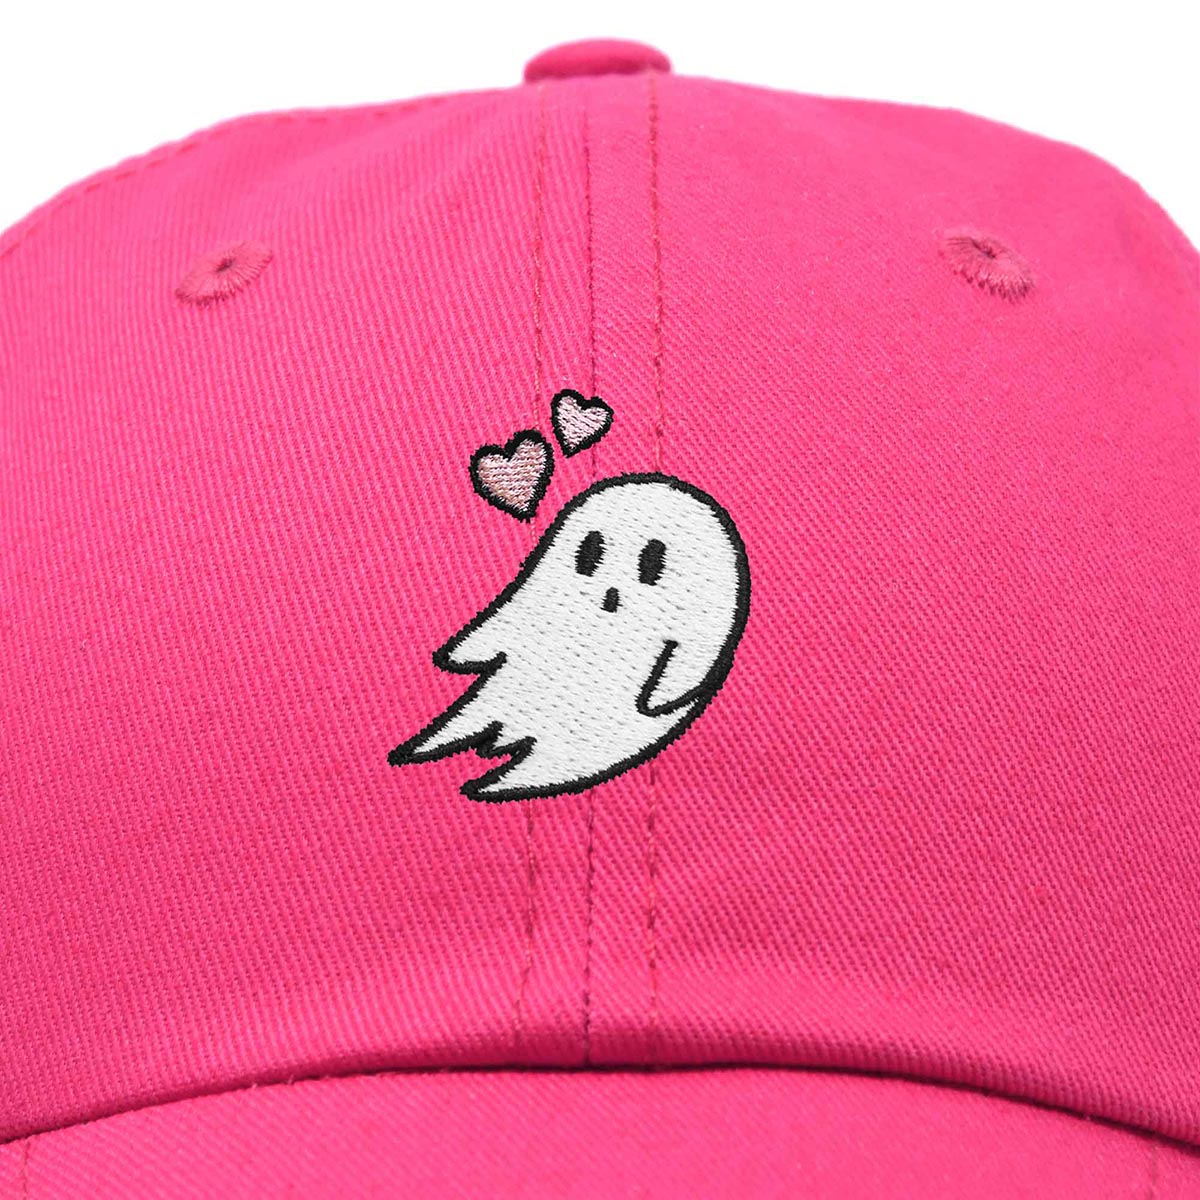 Dalix Heartly Ghost Hat